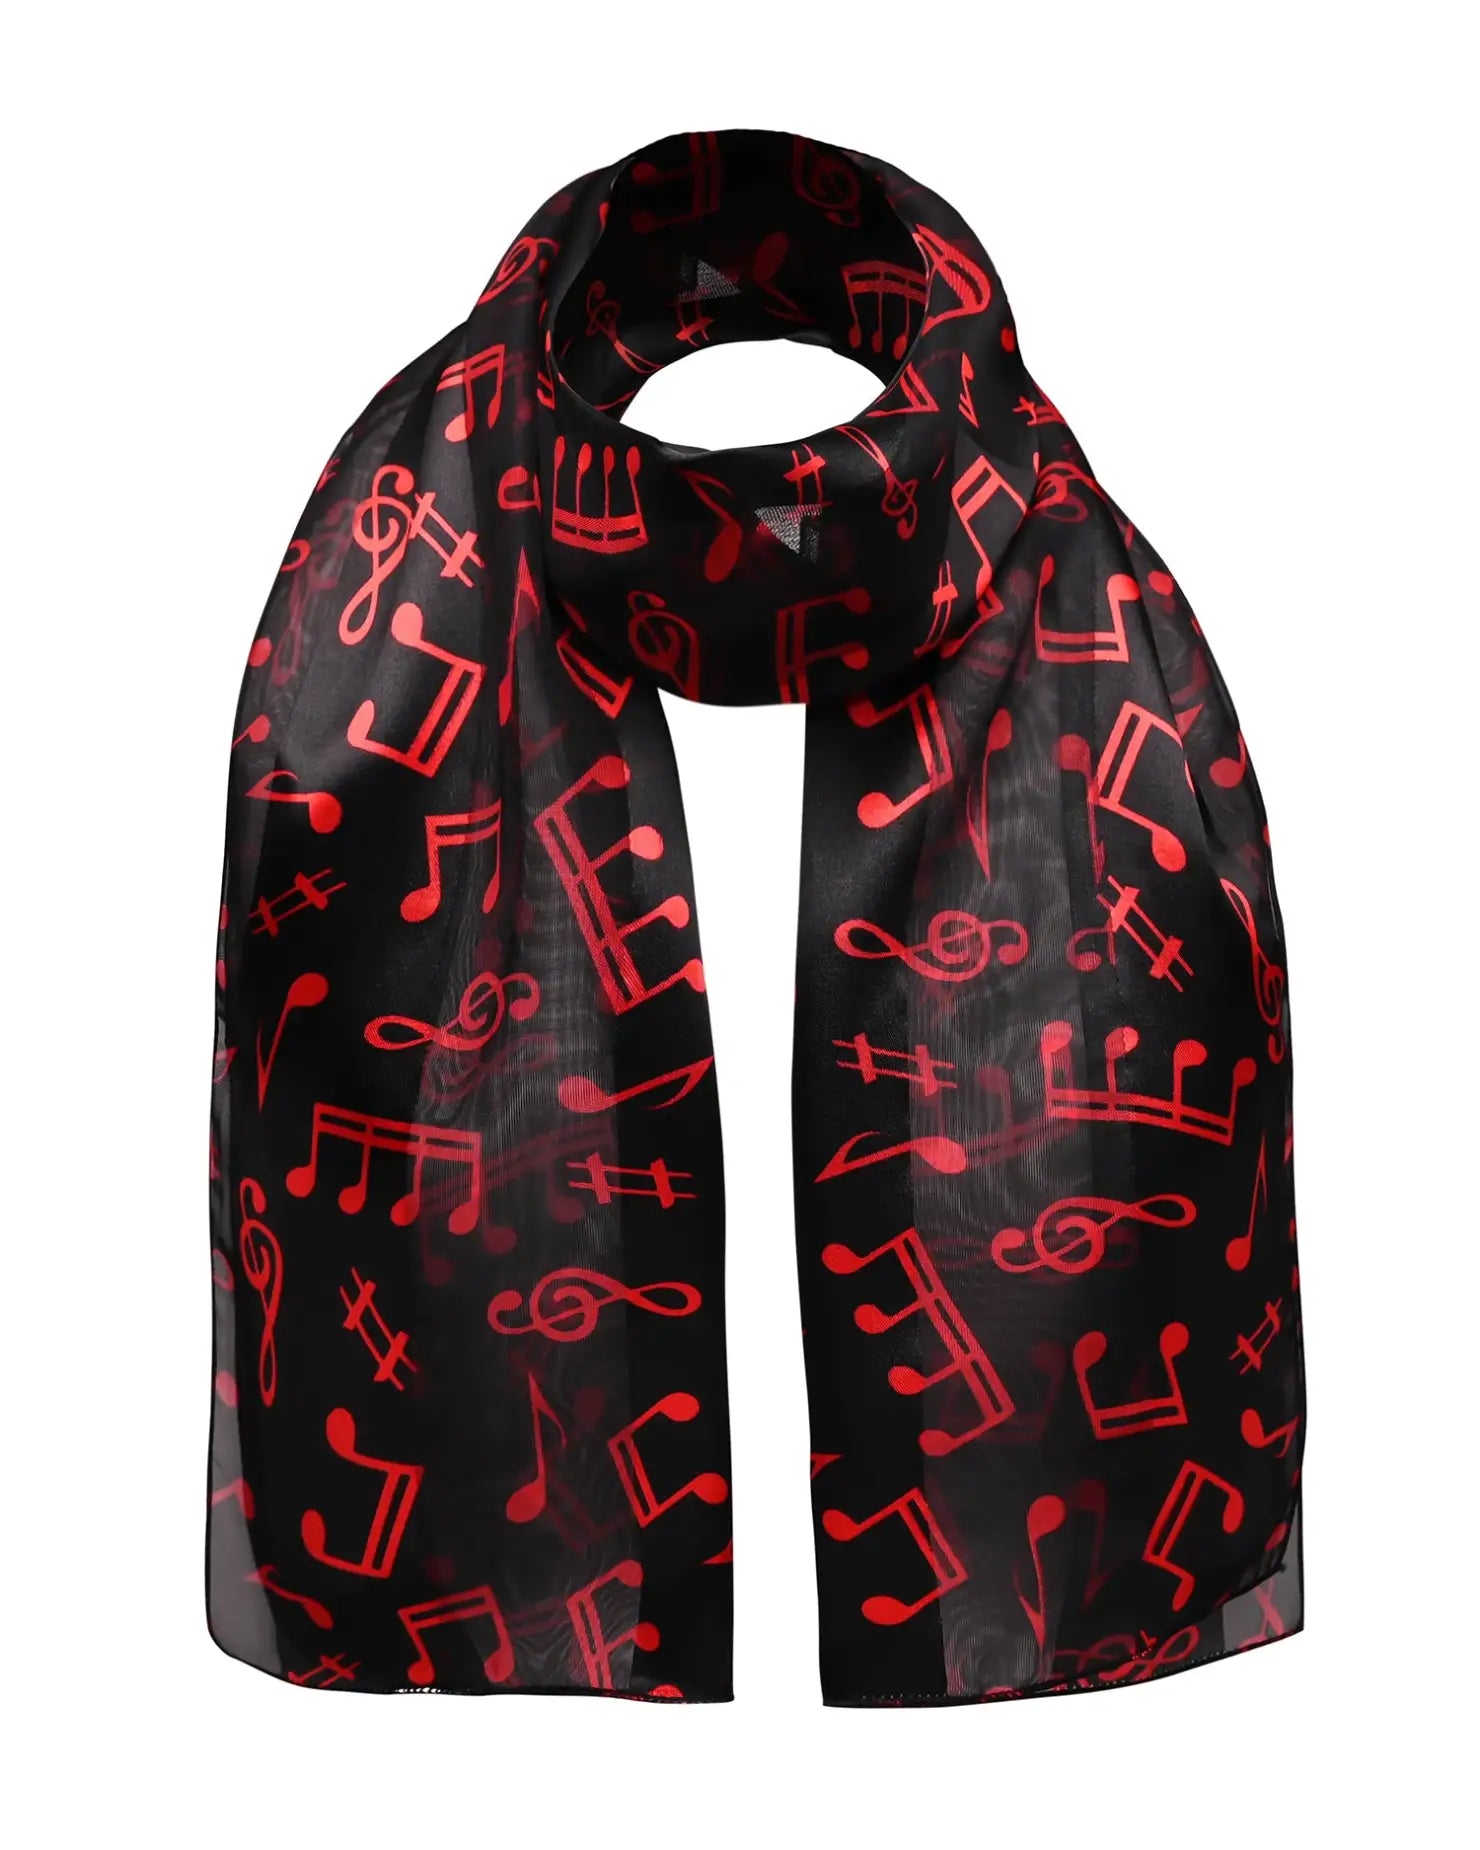 Black scarf with red musical notes on Musical Note Satin Stripe Soft Scarf.